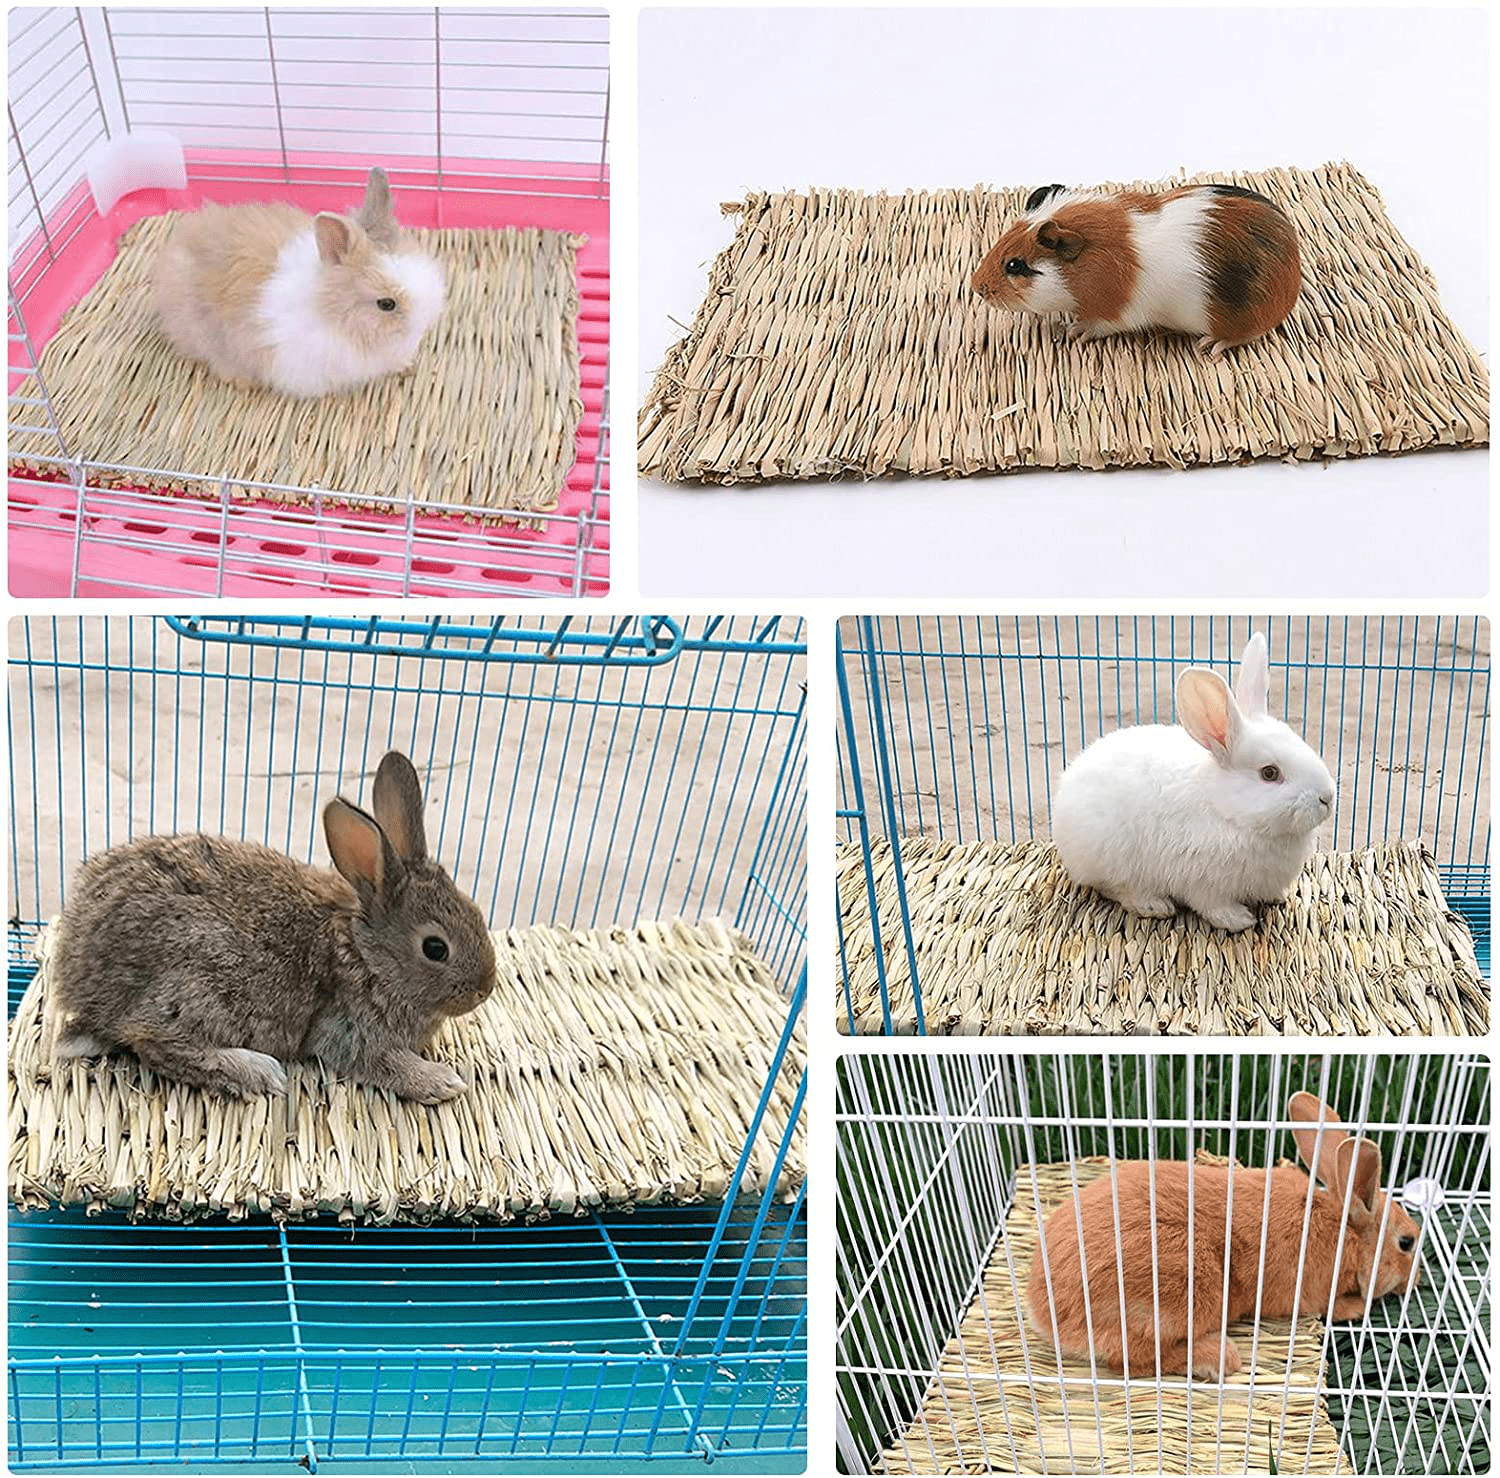 4Pack Grass Mat for Rabbits Bunny Straw Woven Bed Bedding Nest Chew Toy for Guinea Pigs Chinchilla Hamsters Rats Birds and Other Small Animals 11.8 × 9 Inches